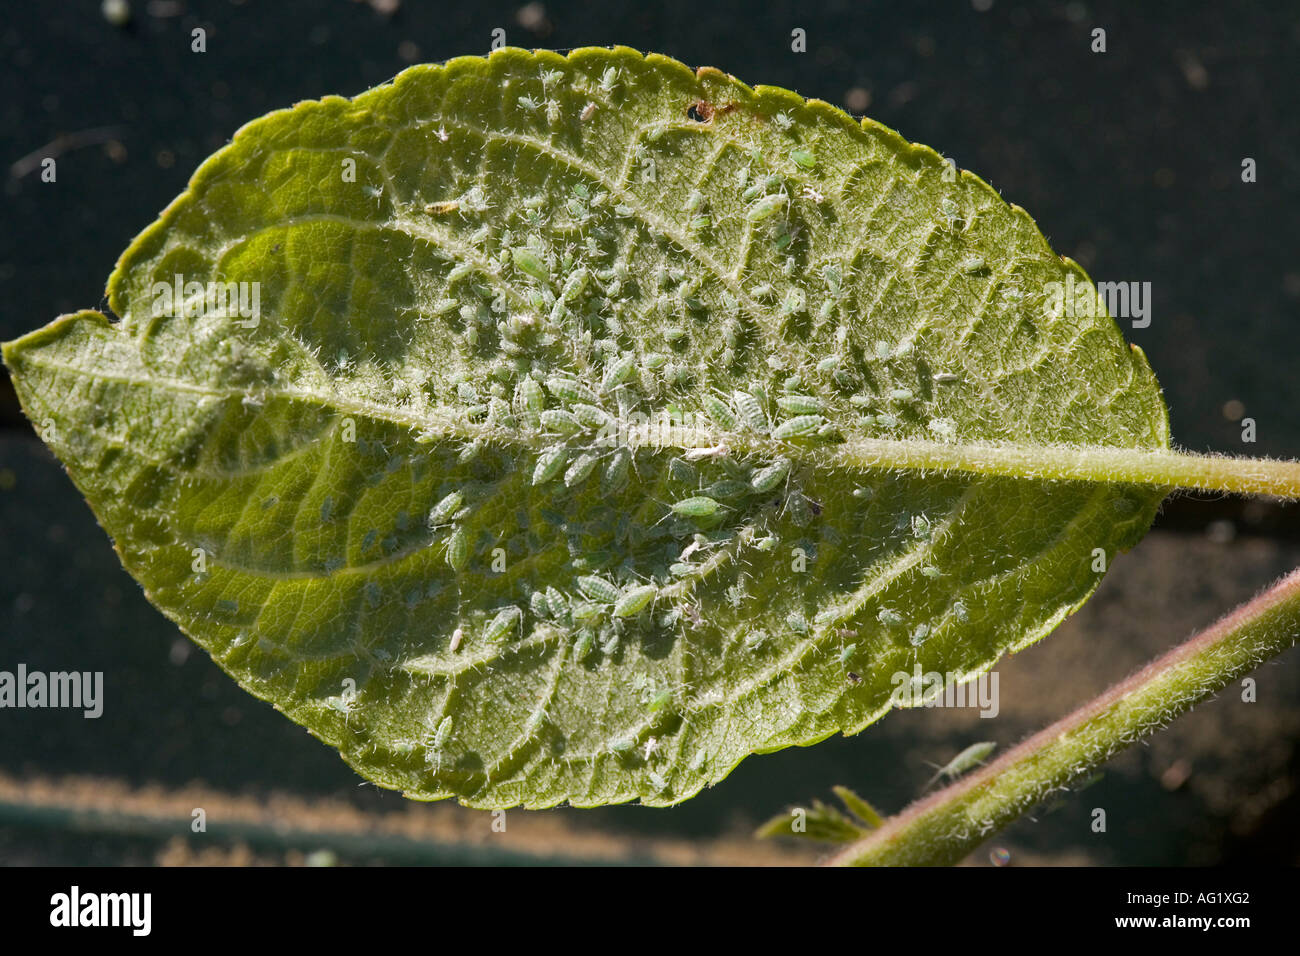 APHIDS GREENFLY INFESTING A PLUM TREE LEAF PICTURED AFTER SPRAYING WITH INSECTICIDE Stock Photo